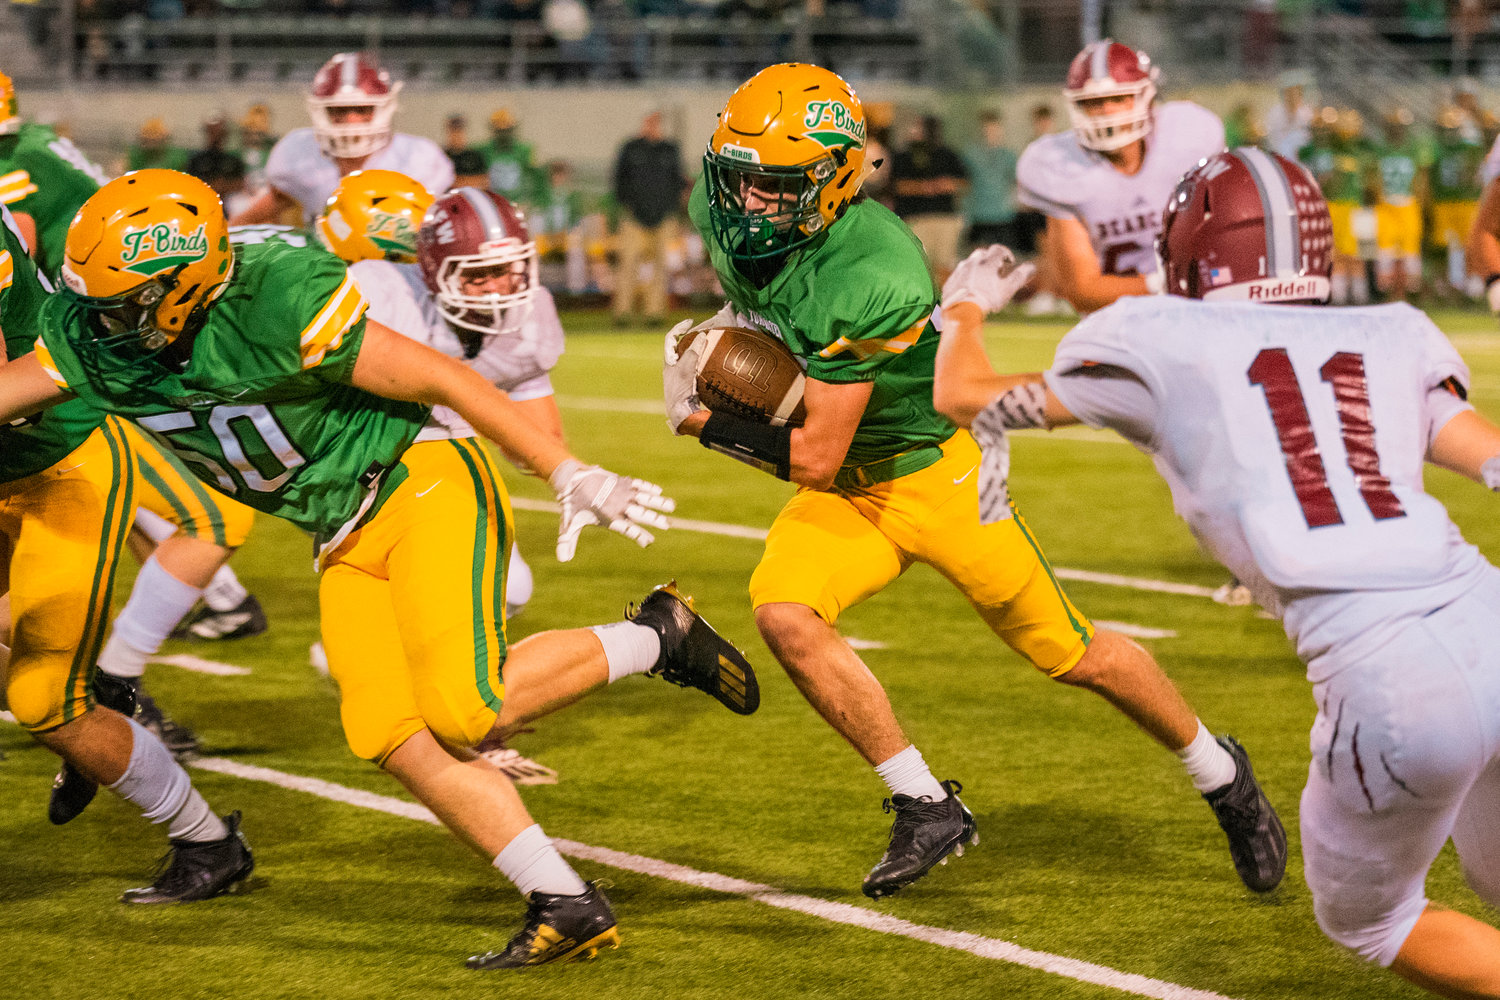 Tumwater’s Kai McLeod runs with the football past defenders Friday night during a game against W.F. West.